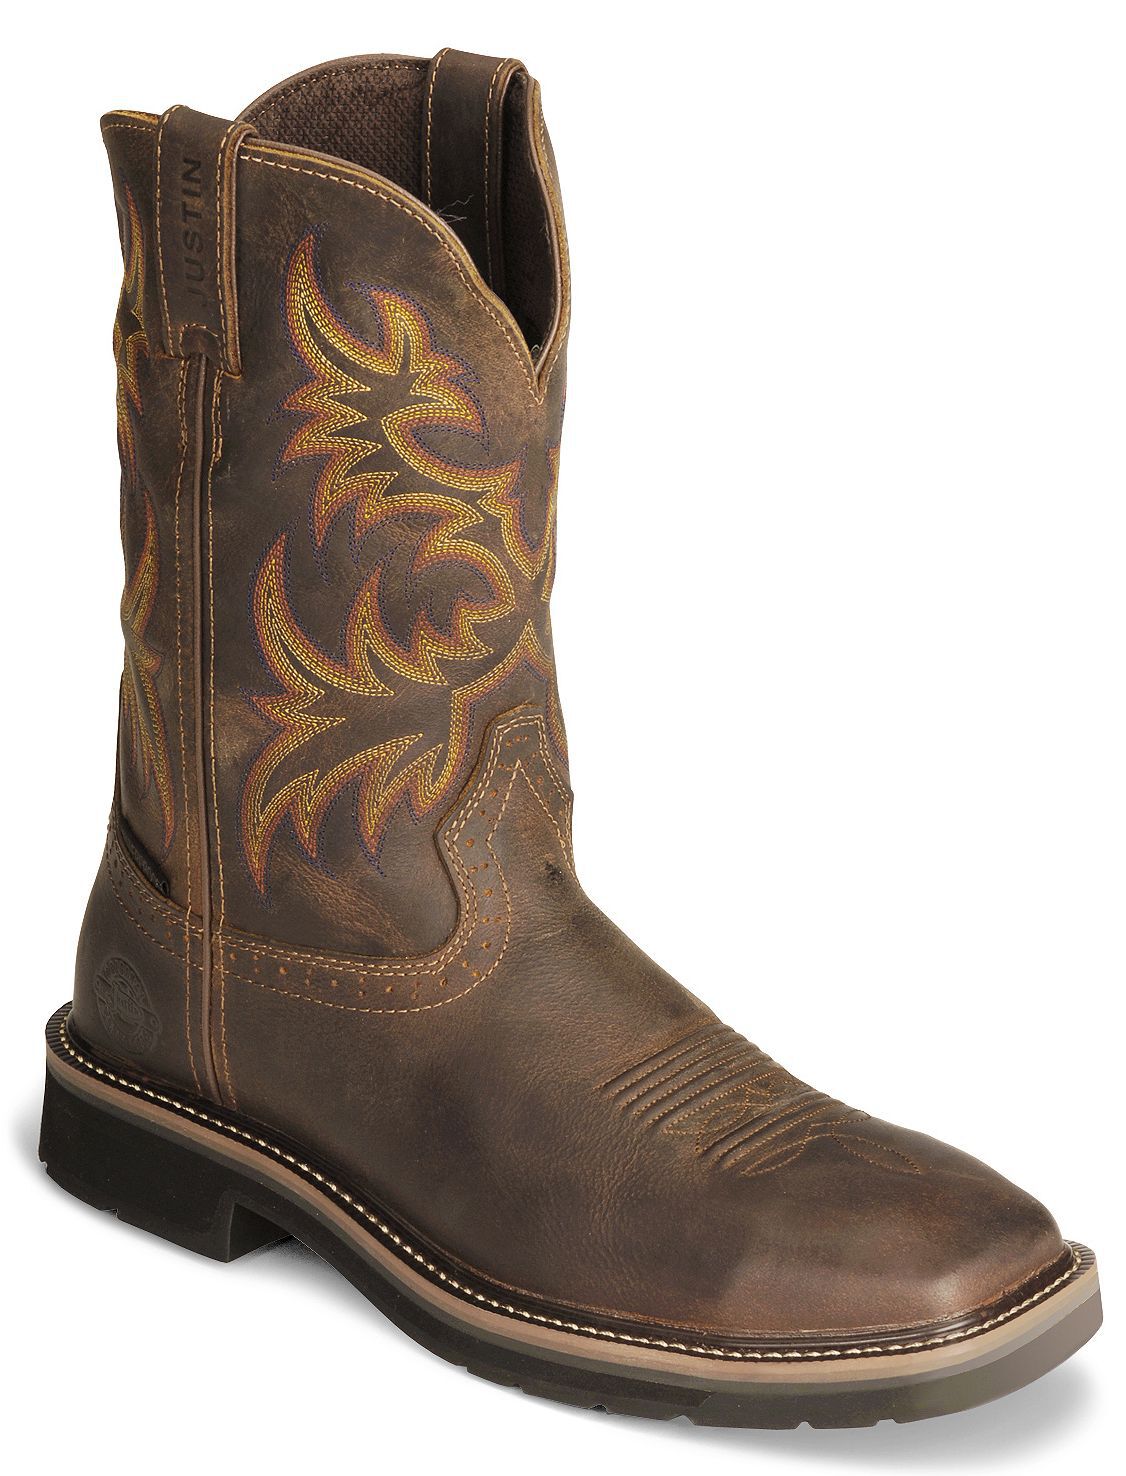 Men's Justin Boots - Country Outfitter